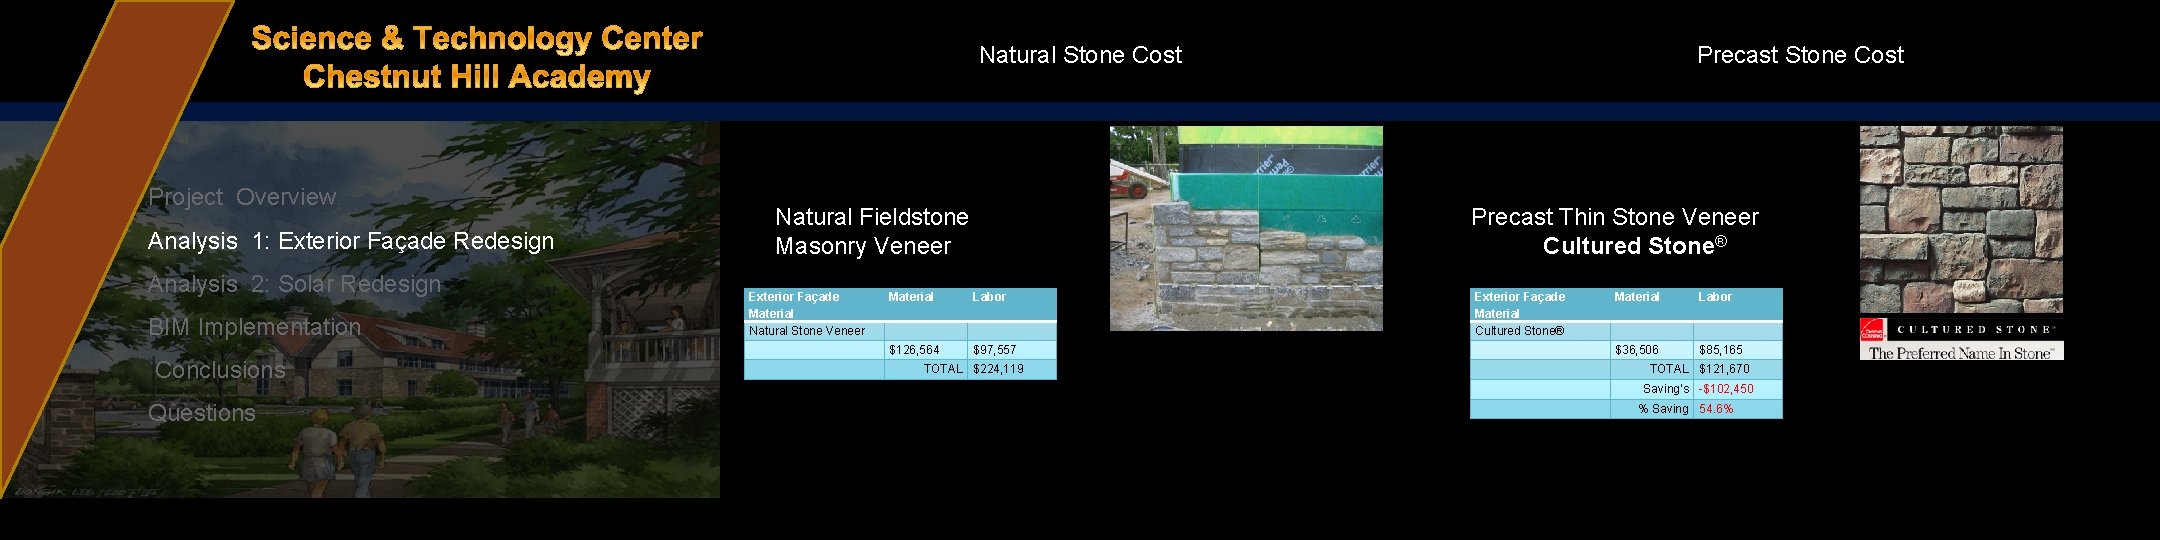 Precast Stone Cost Natural Stone Cost Project Overview Analysis 1: Exterior Façade Redesign Analysis